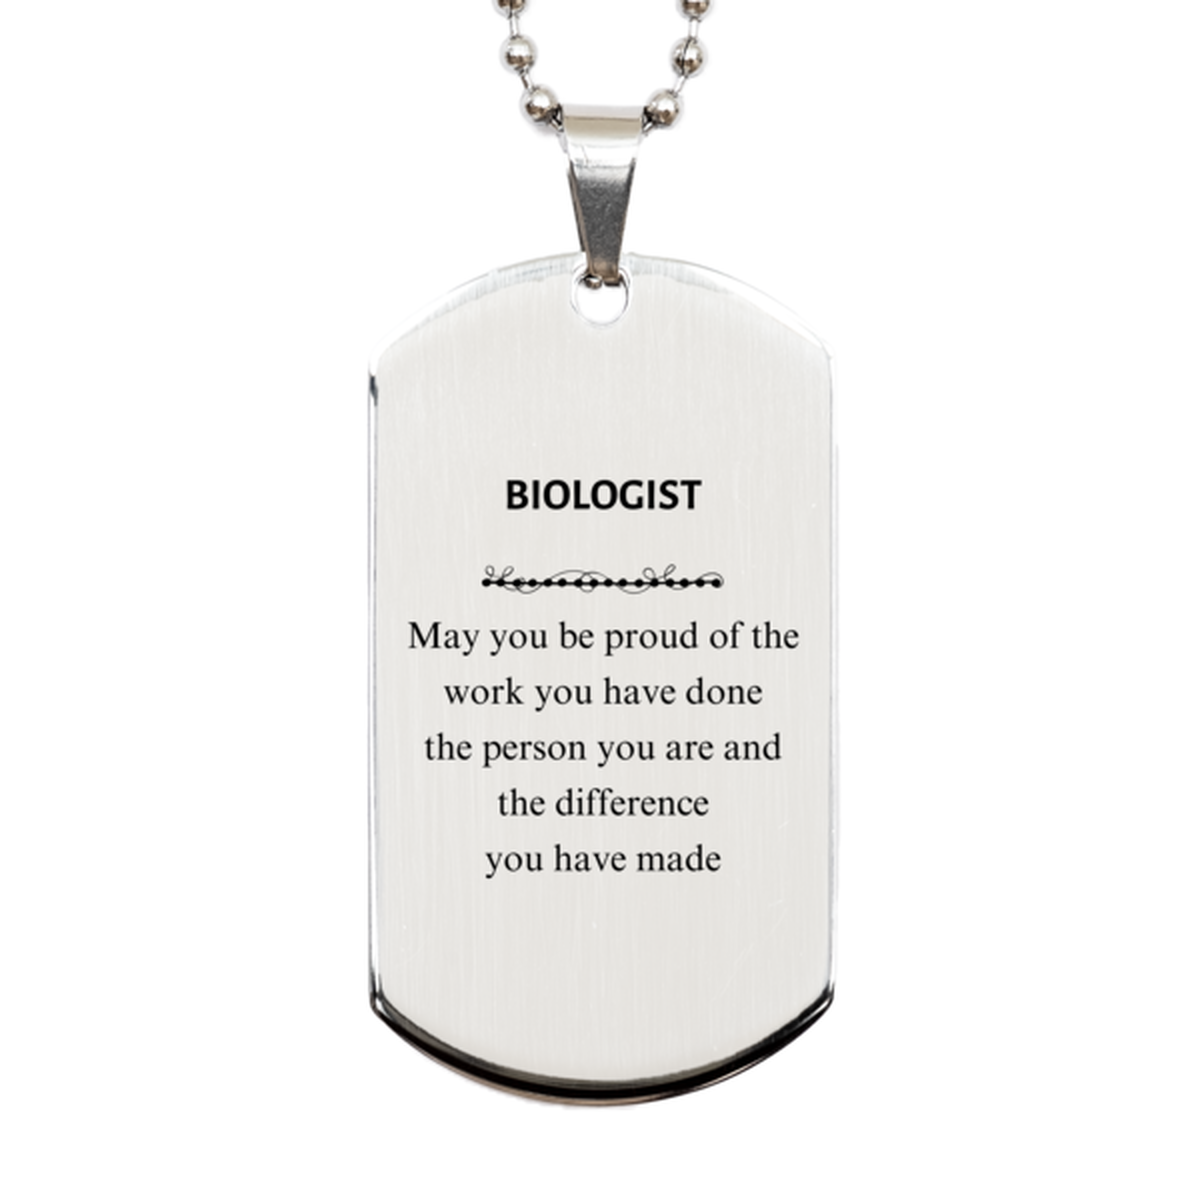 Biologist May you be proud of the work you have done, Retirement Biologist Silver Dog Tag for Colleague Appreciation Gifts Amazing for Biologist